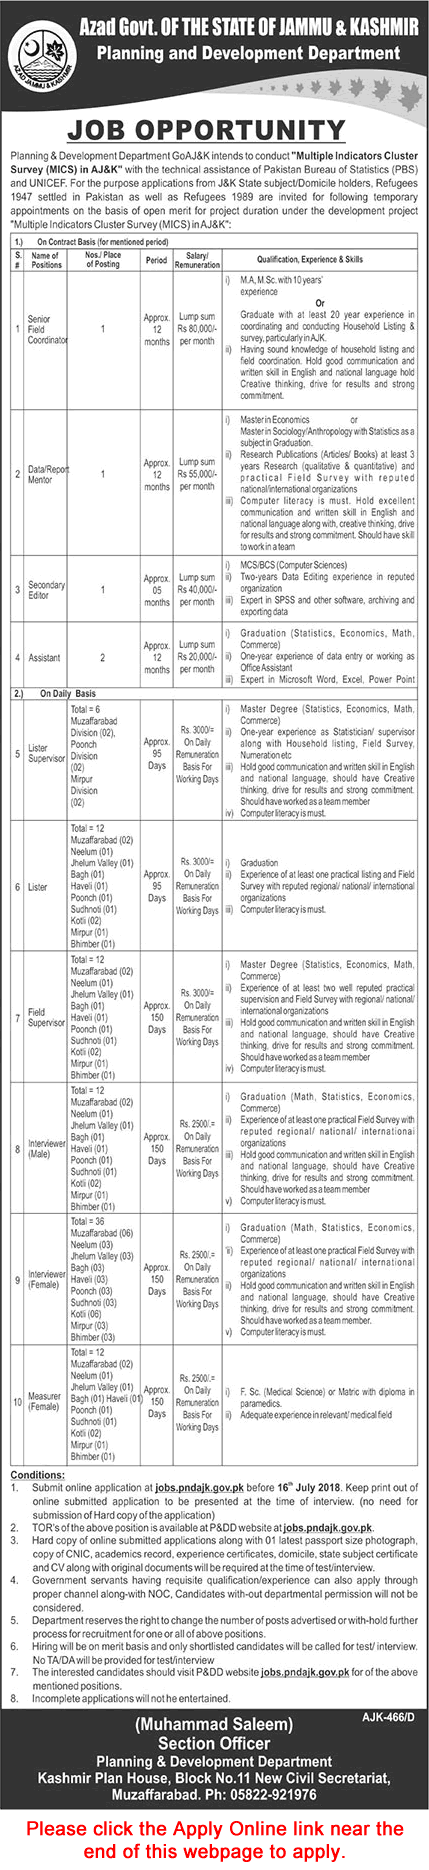 Planning and Development Department AJK Jobs June 2018 July Apply Online Interviewers, Measurers & Others Latest